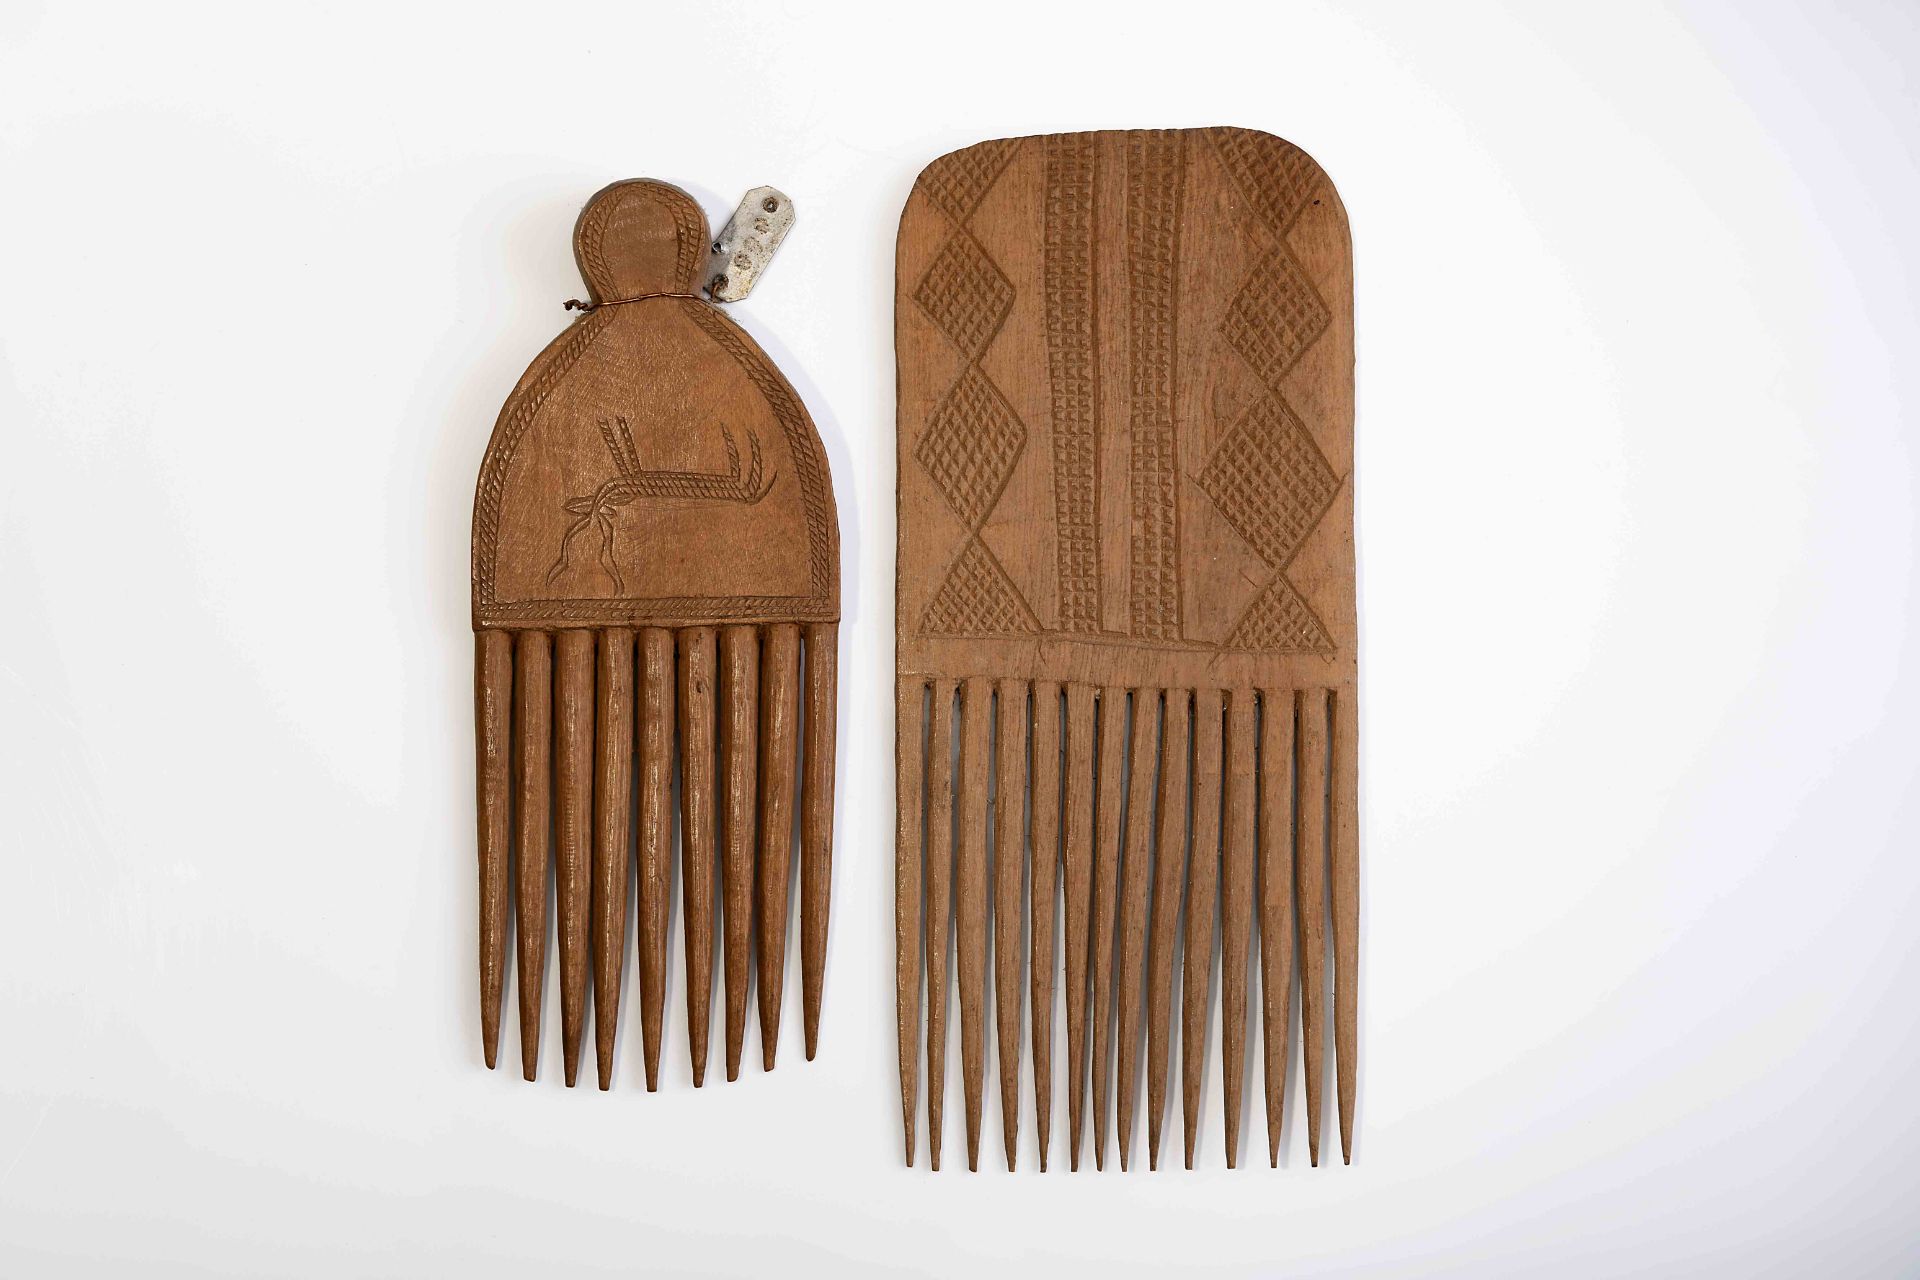 Two different combs